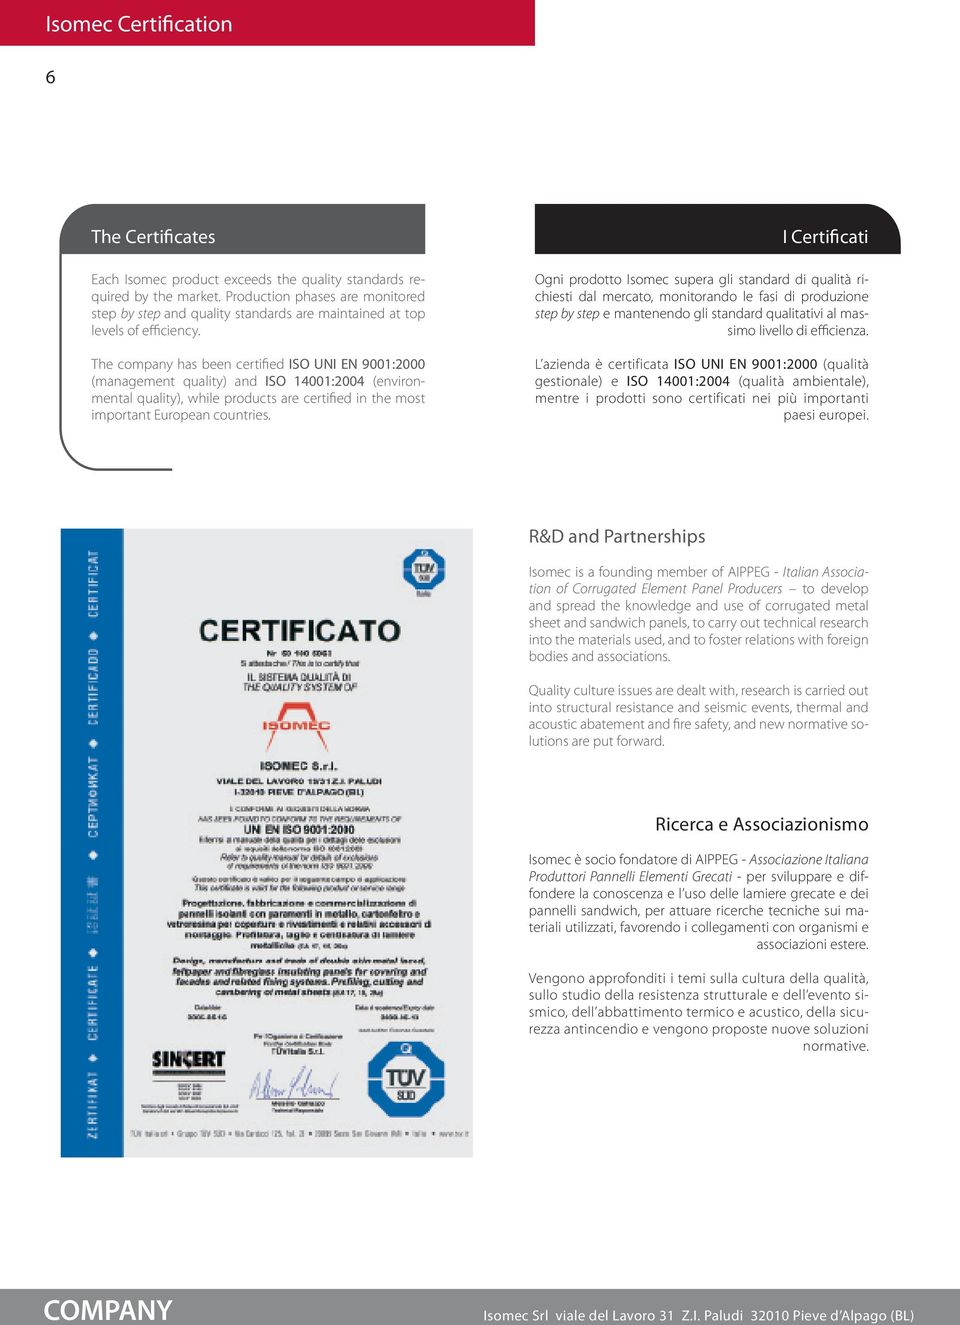 The company has been certified ISO UNI EN 9001:2000 (management quality) and ISO 14001:2004 (environmental quality), while products are certified in the most important European countries.